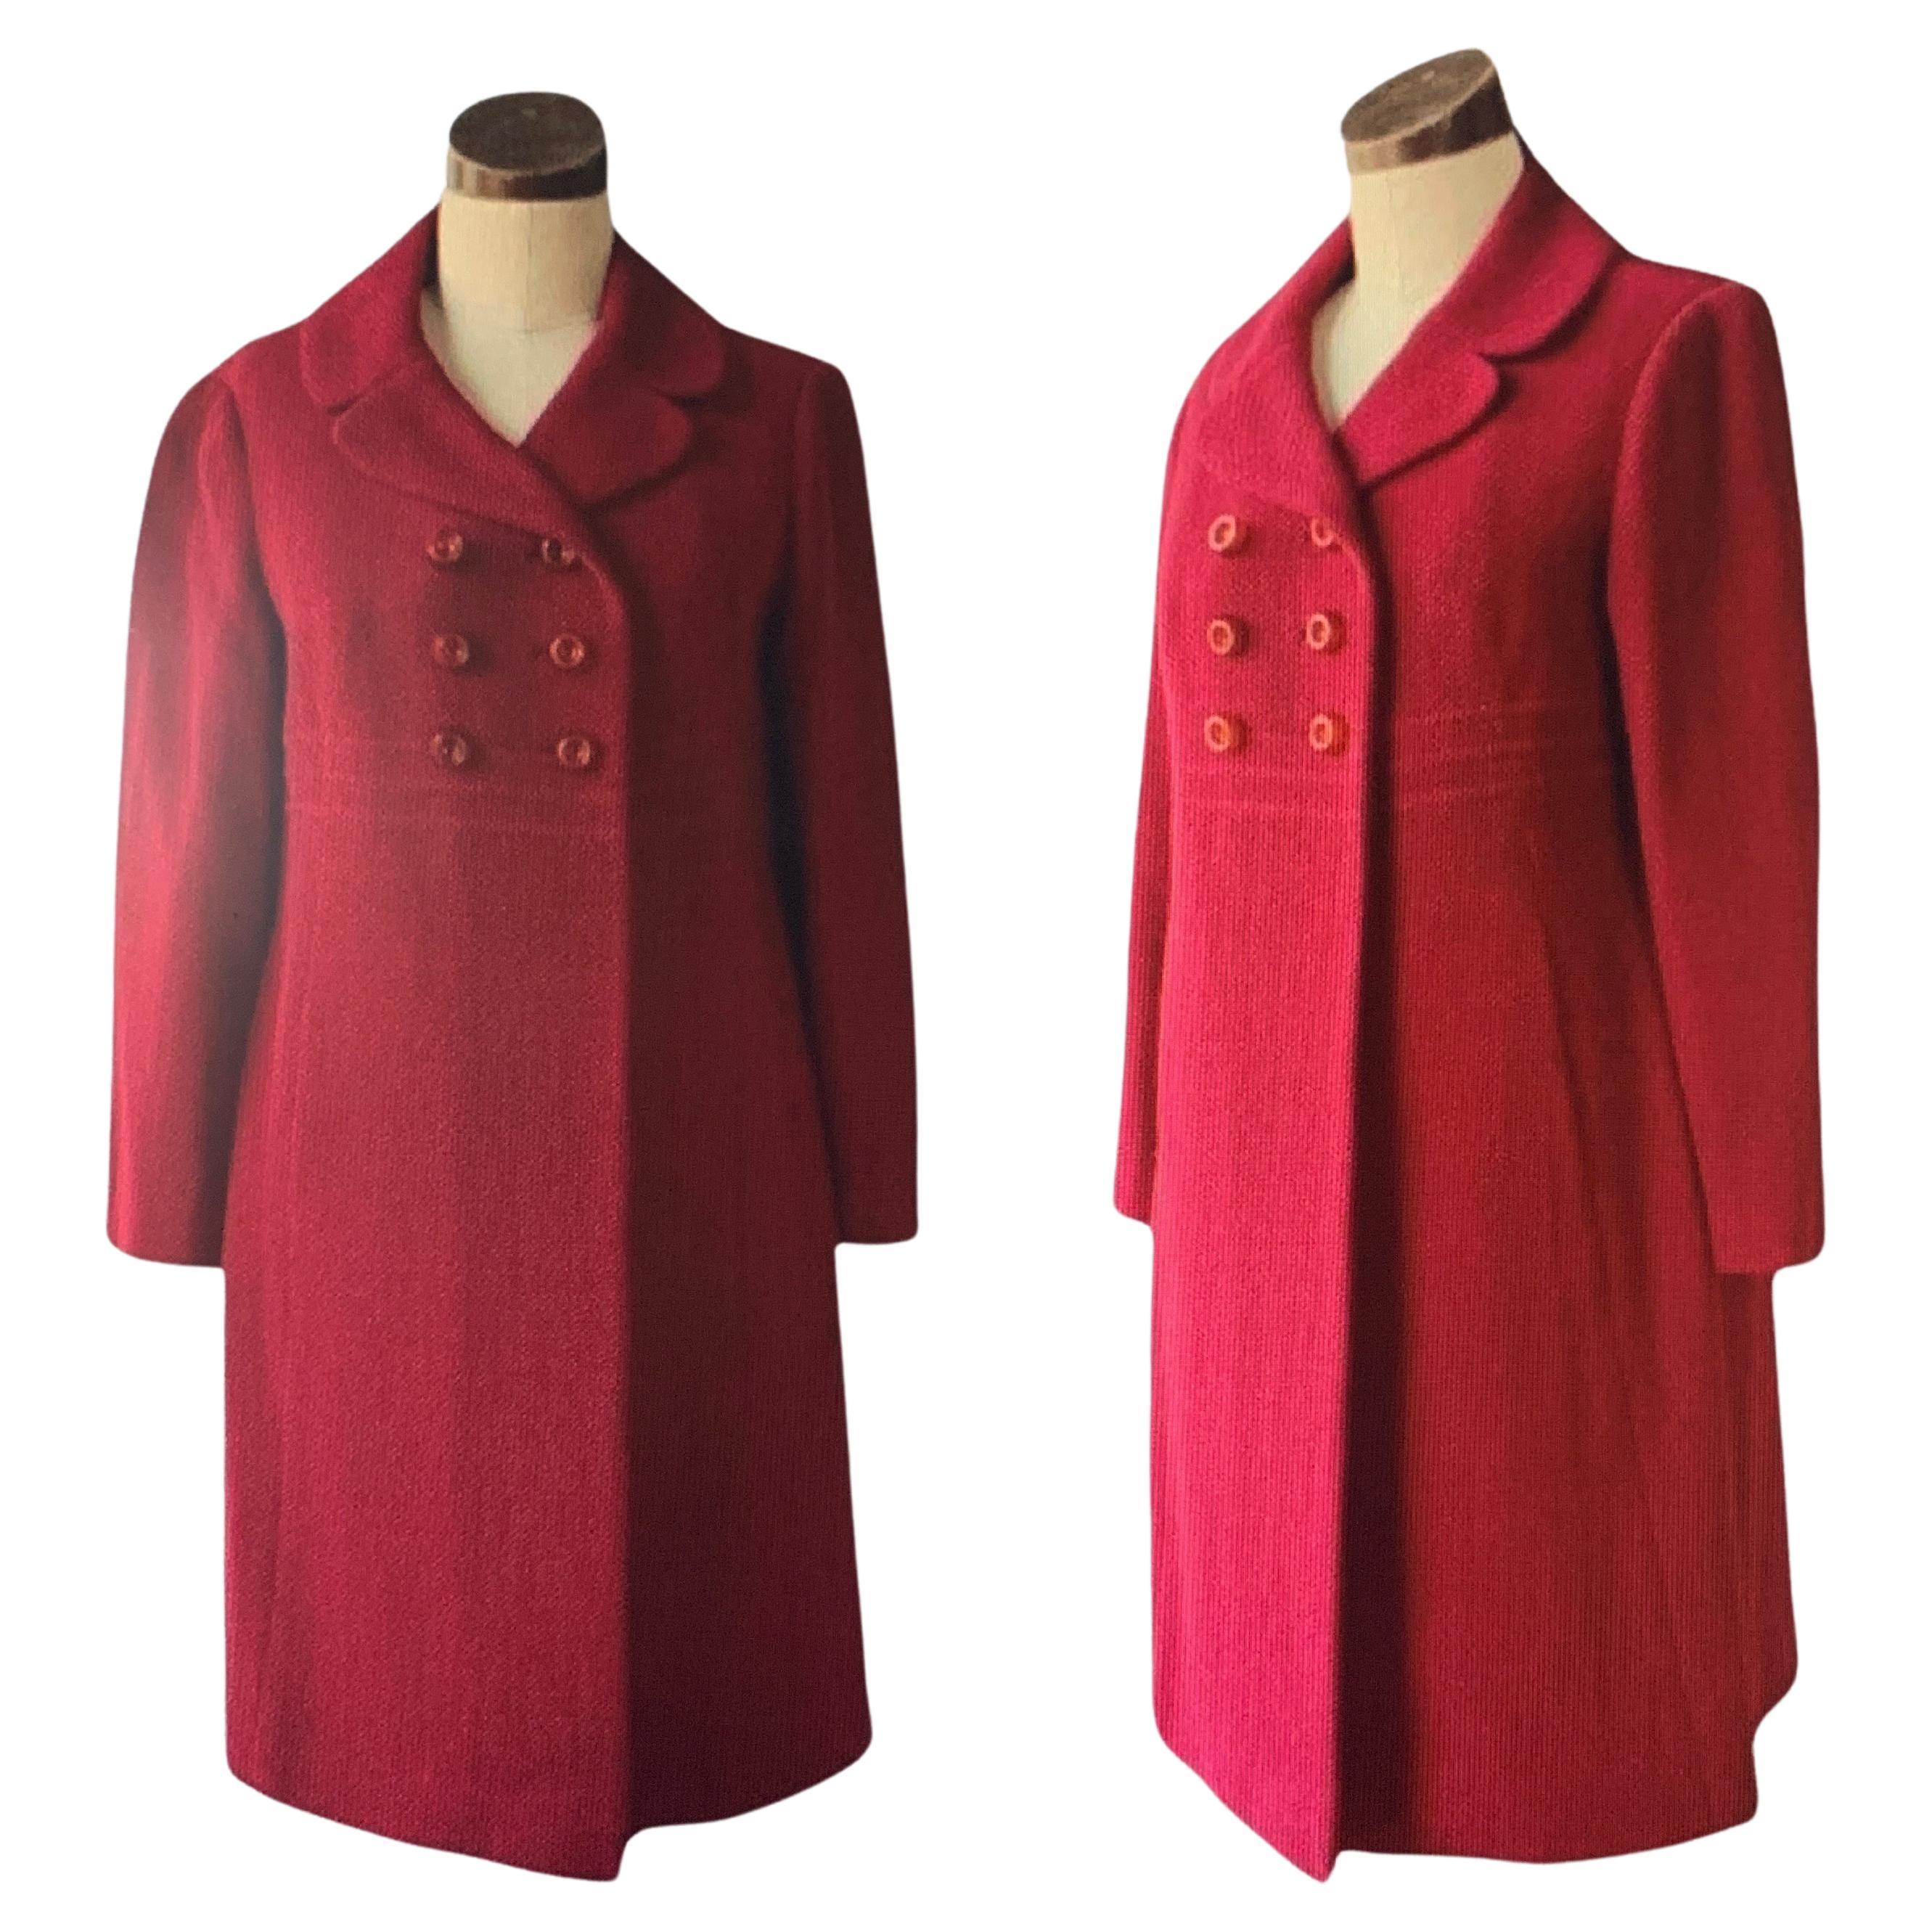 Prince Fashion, 1940s Dress Coat, Ribbed Wool Blend, Fully Lined with Embroidery, Round Collar, Two Lined Pockets, Interior Lined Pocket, Three Lucite Closure Buttons Front and additional Three Decorative Lucite Buttons, Made in Hong Kong, Medium